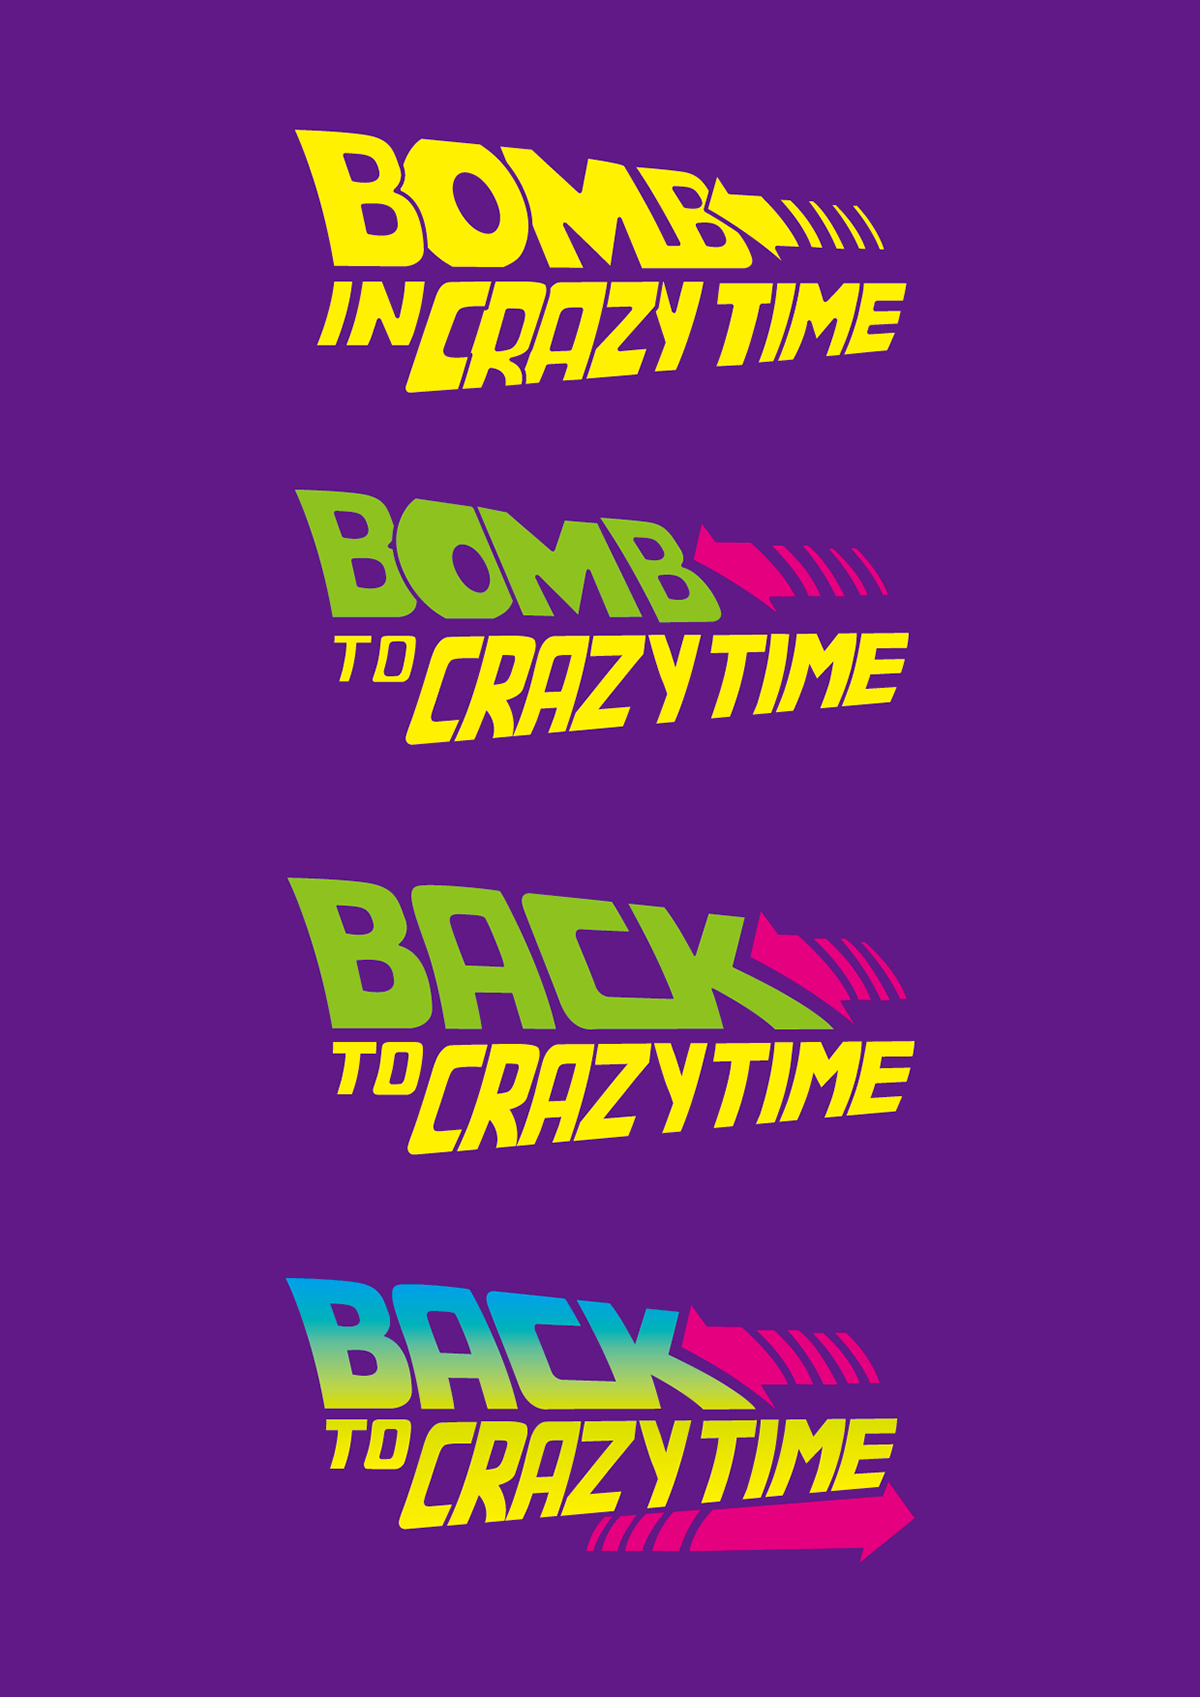 CRAZYBOMB Illustrator Back in Crazy Time back to the future crazy bomb 瘋狂 炸彈 瘋狂炸彈 taiwan 台灣 back to school bttf 回到未來 品牌